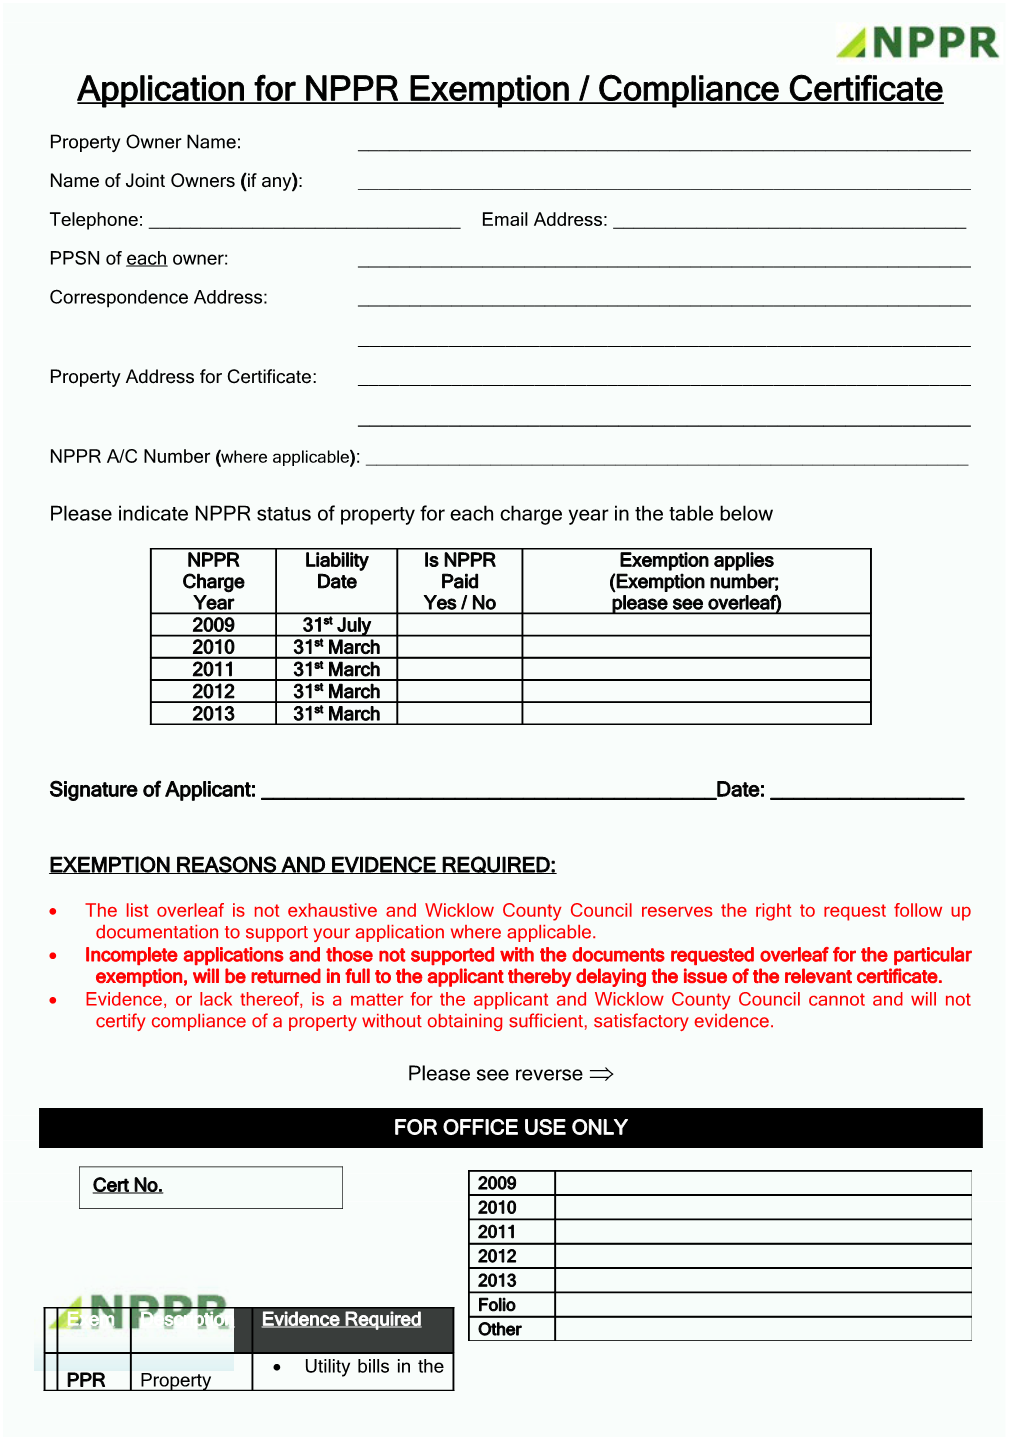 Application for Certificate for NPPR